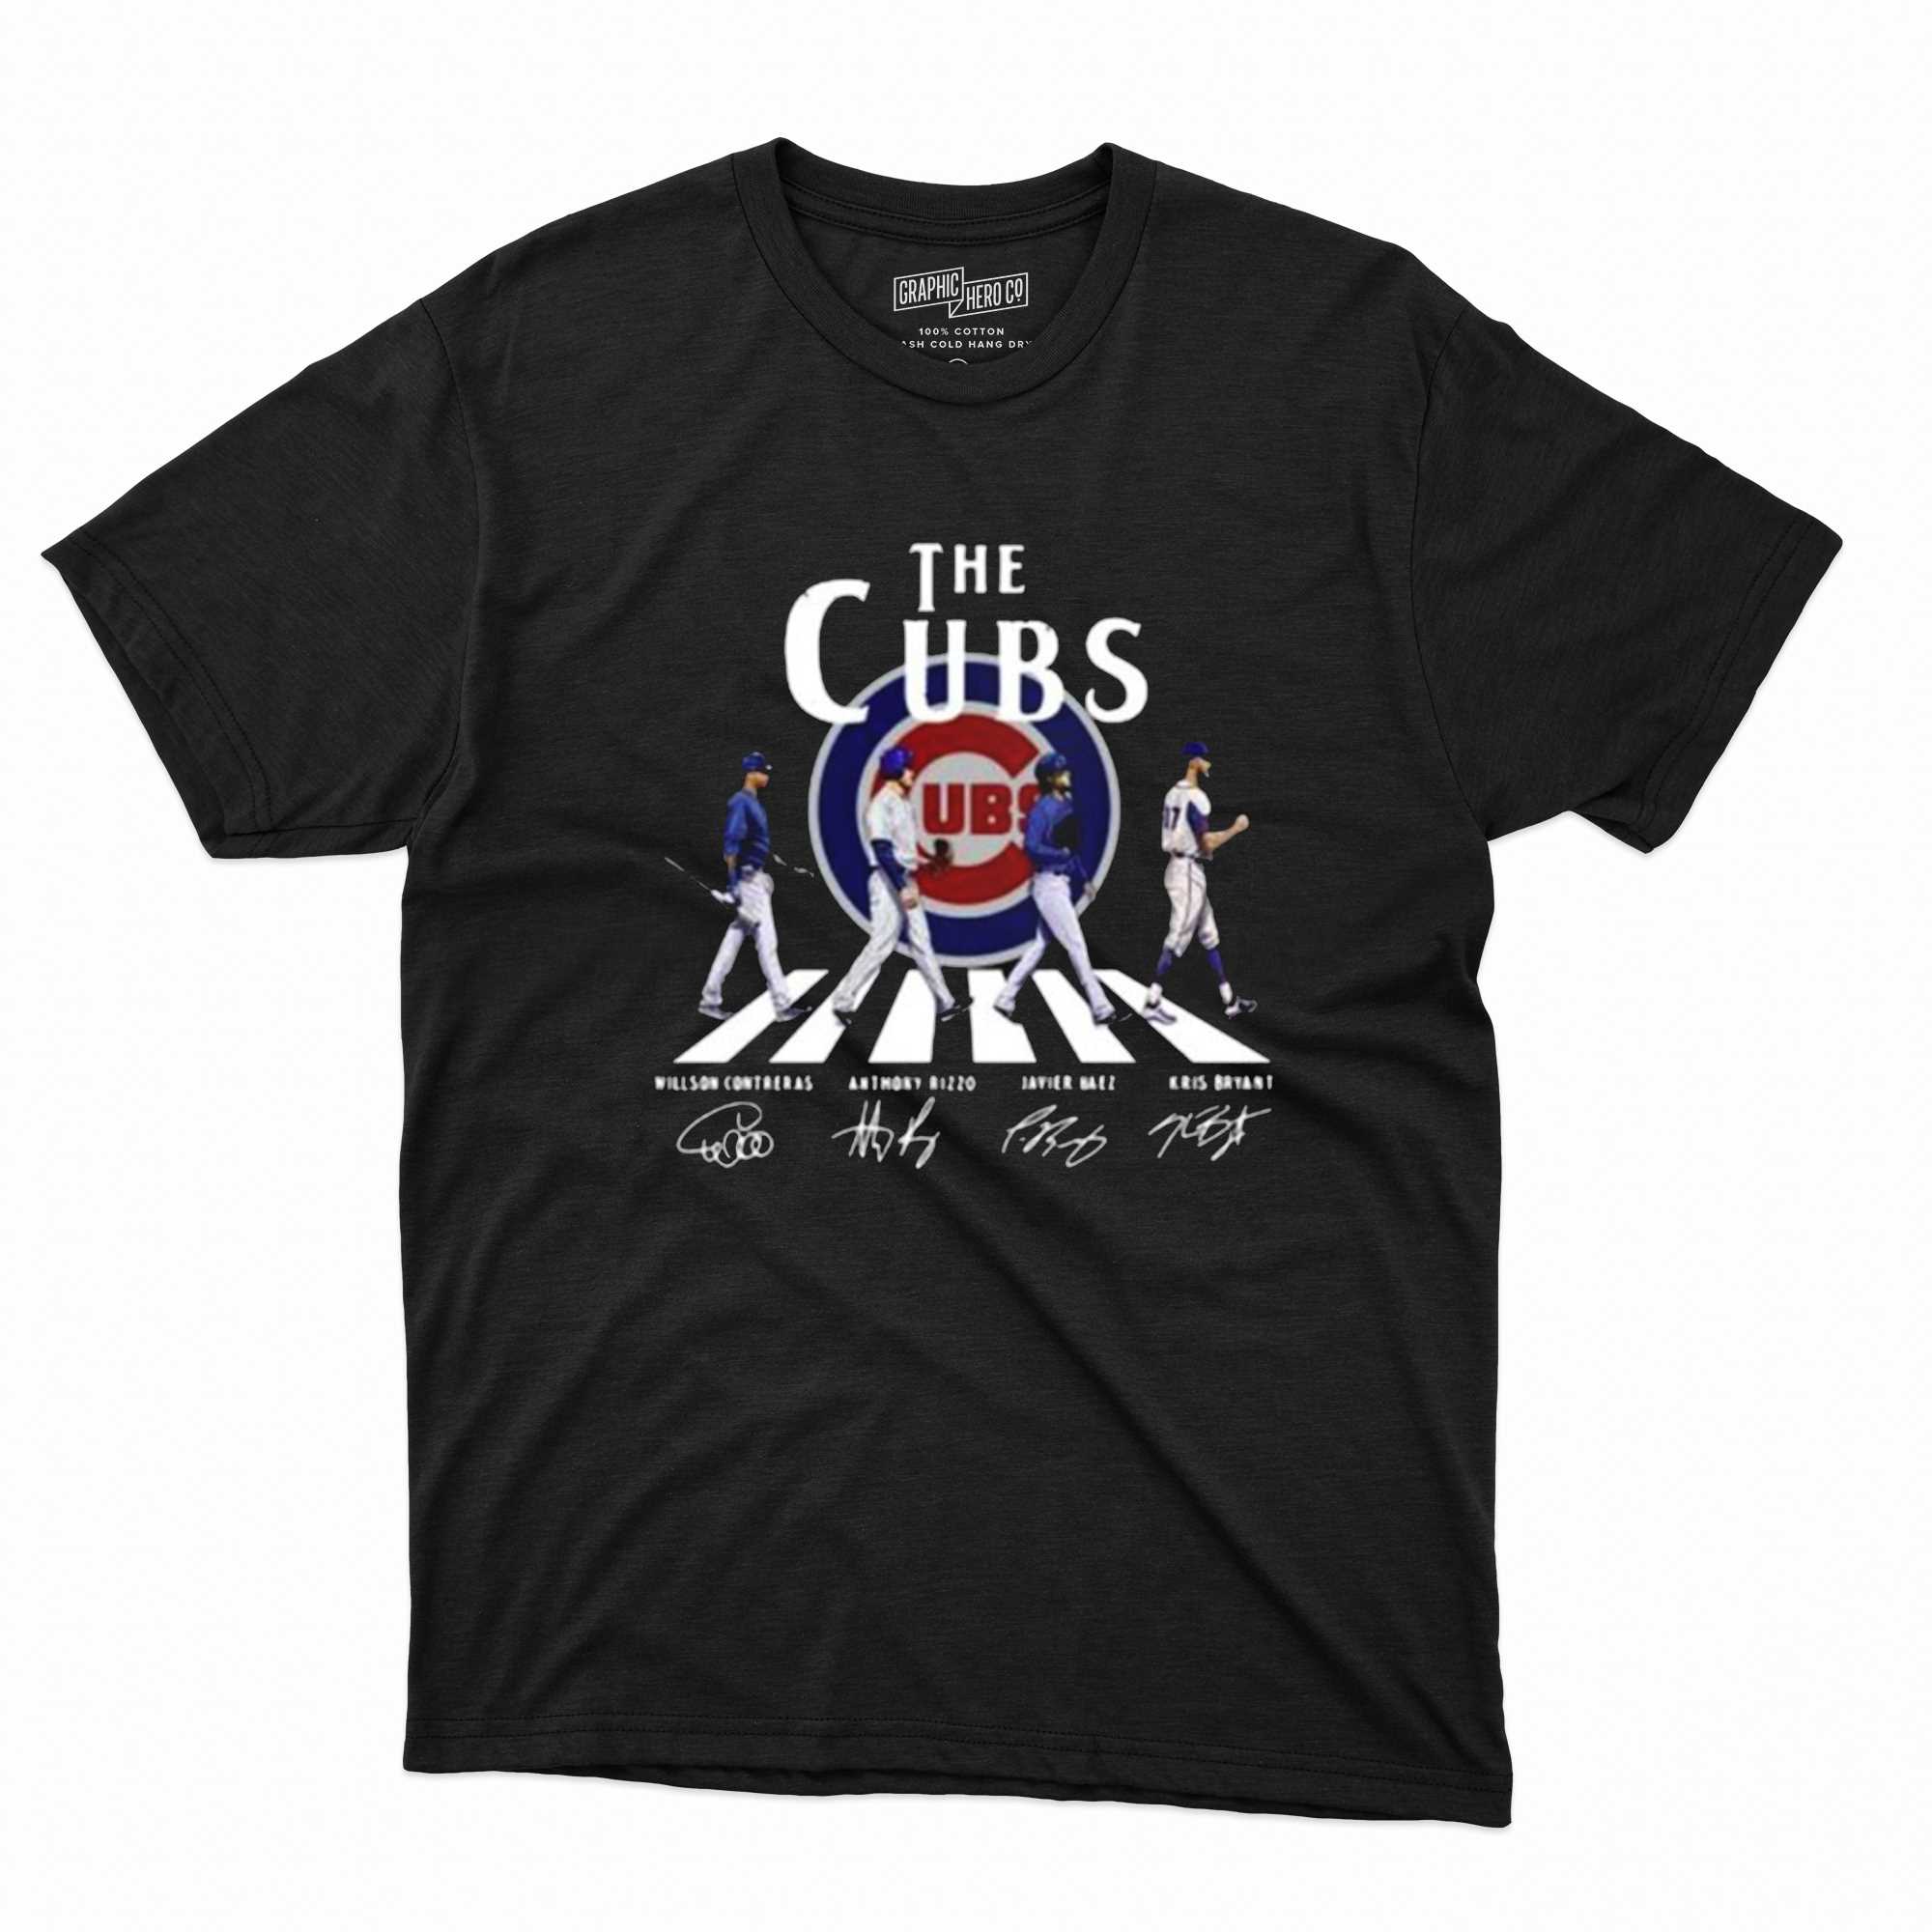 Chicago Cubs Signatures Gift For Fan T-shirt - Shibtee Clothing